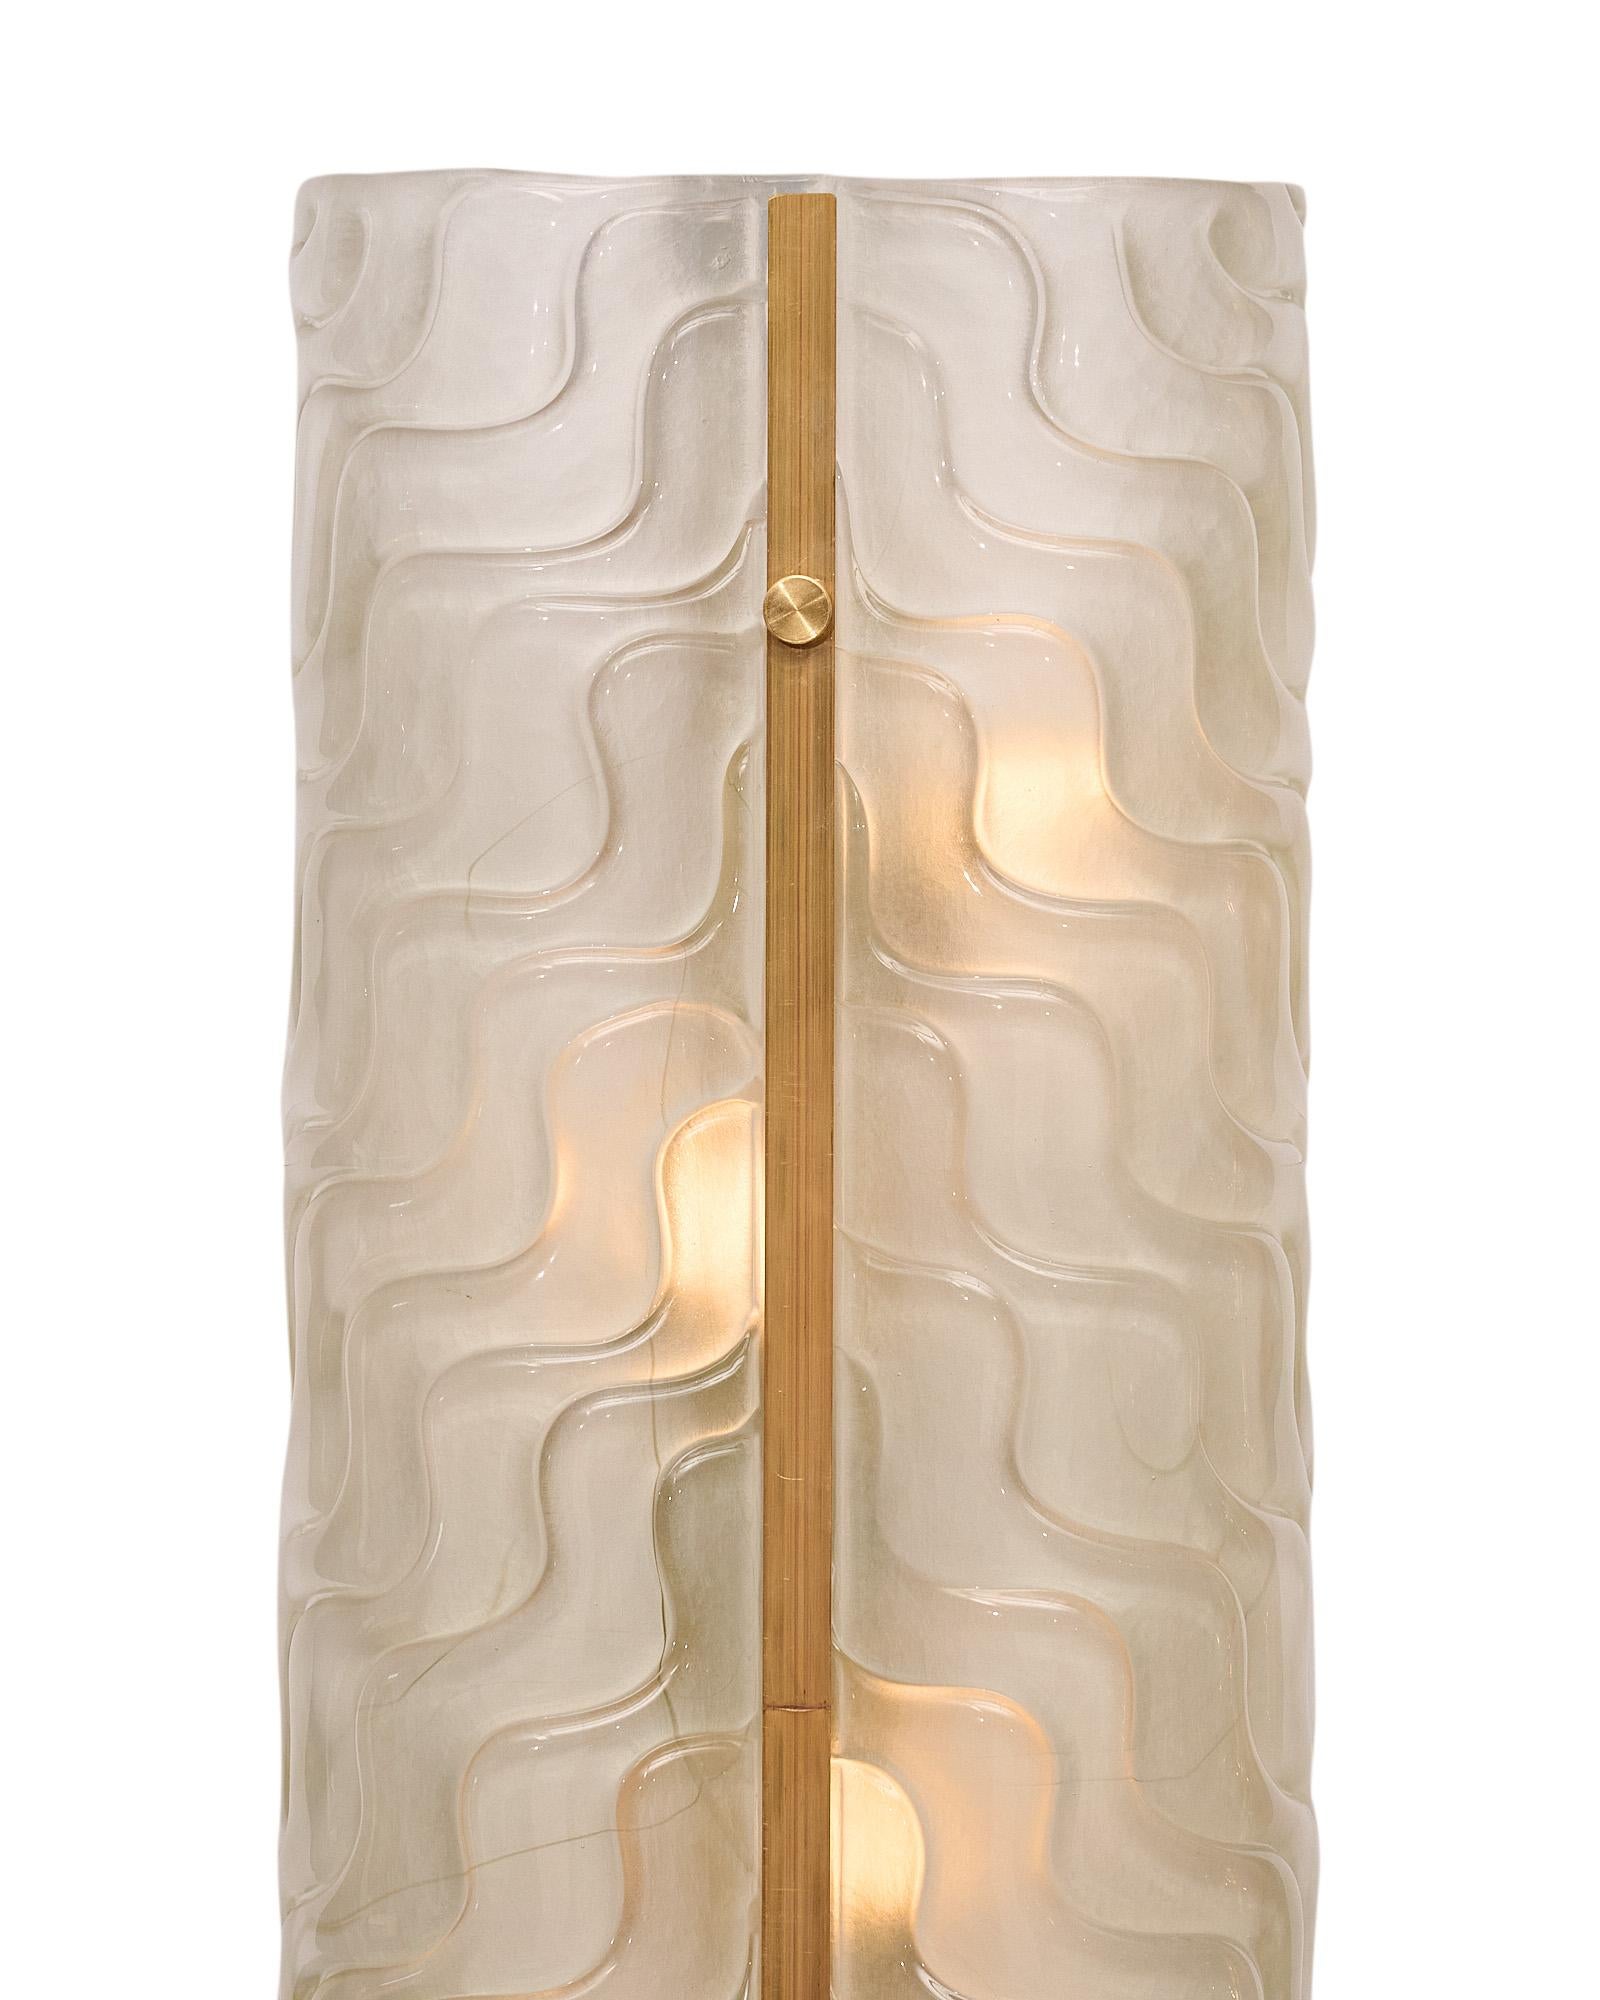 Pair of sconces made of hand-blown Murano glass with a stamped pattern and brass trim. This pair has been newly wired to fit US standards.